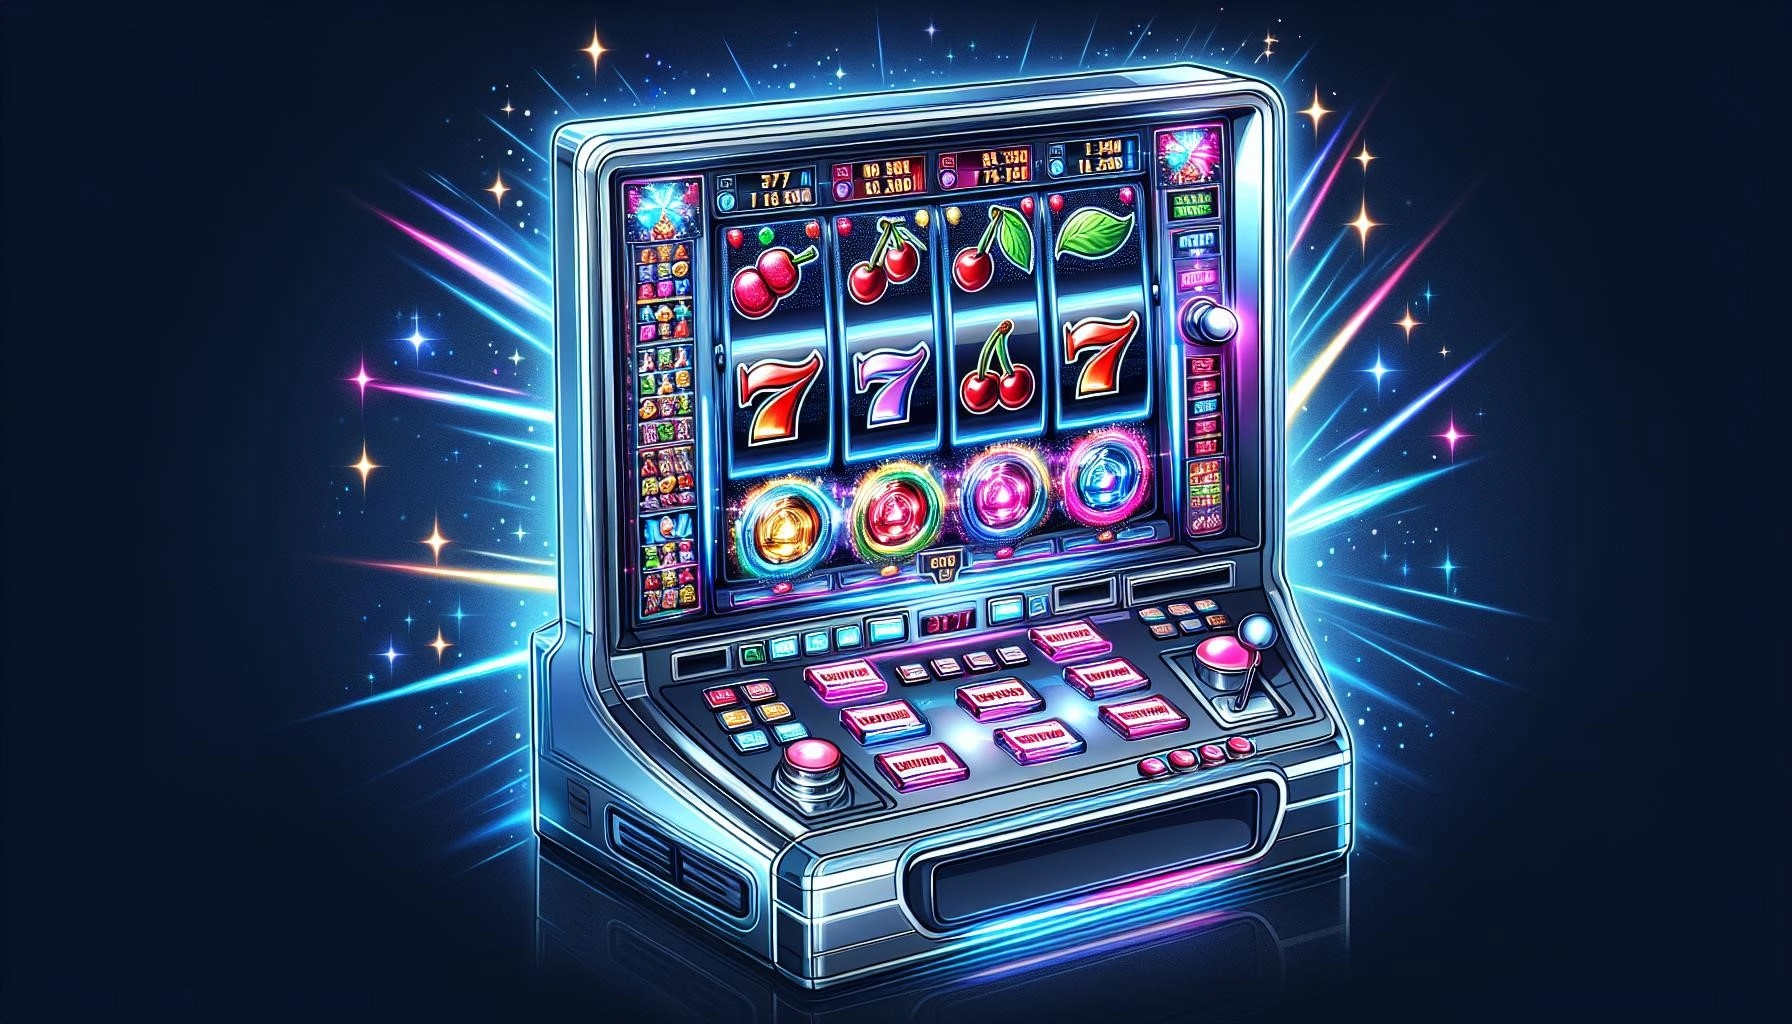 The Cutting-Edge Appeal of TrueLab Games Video Slots